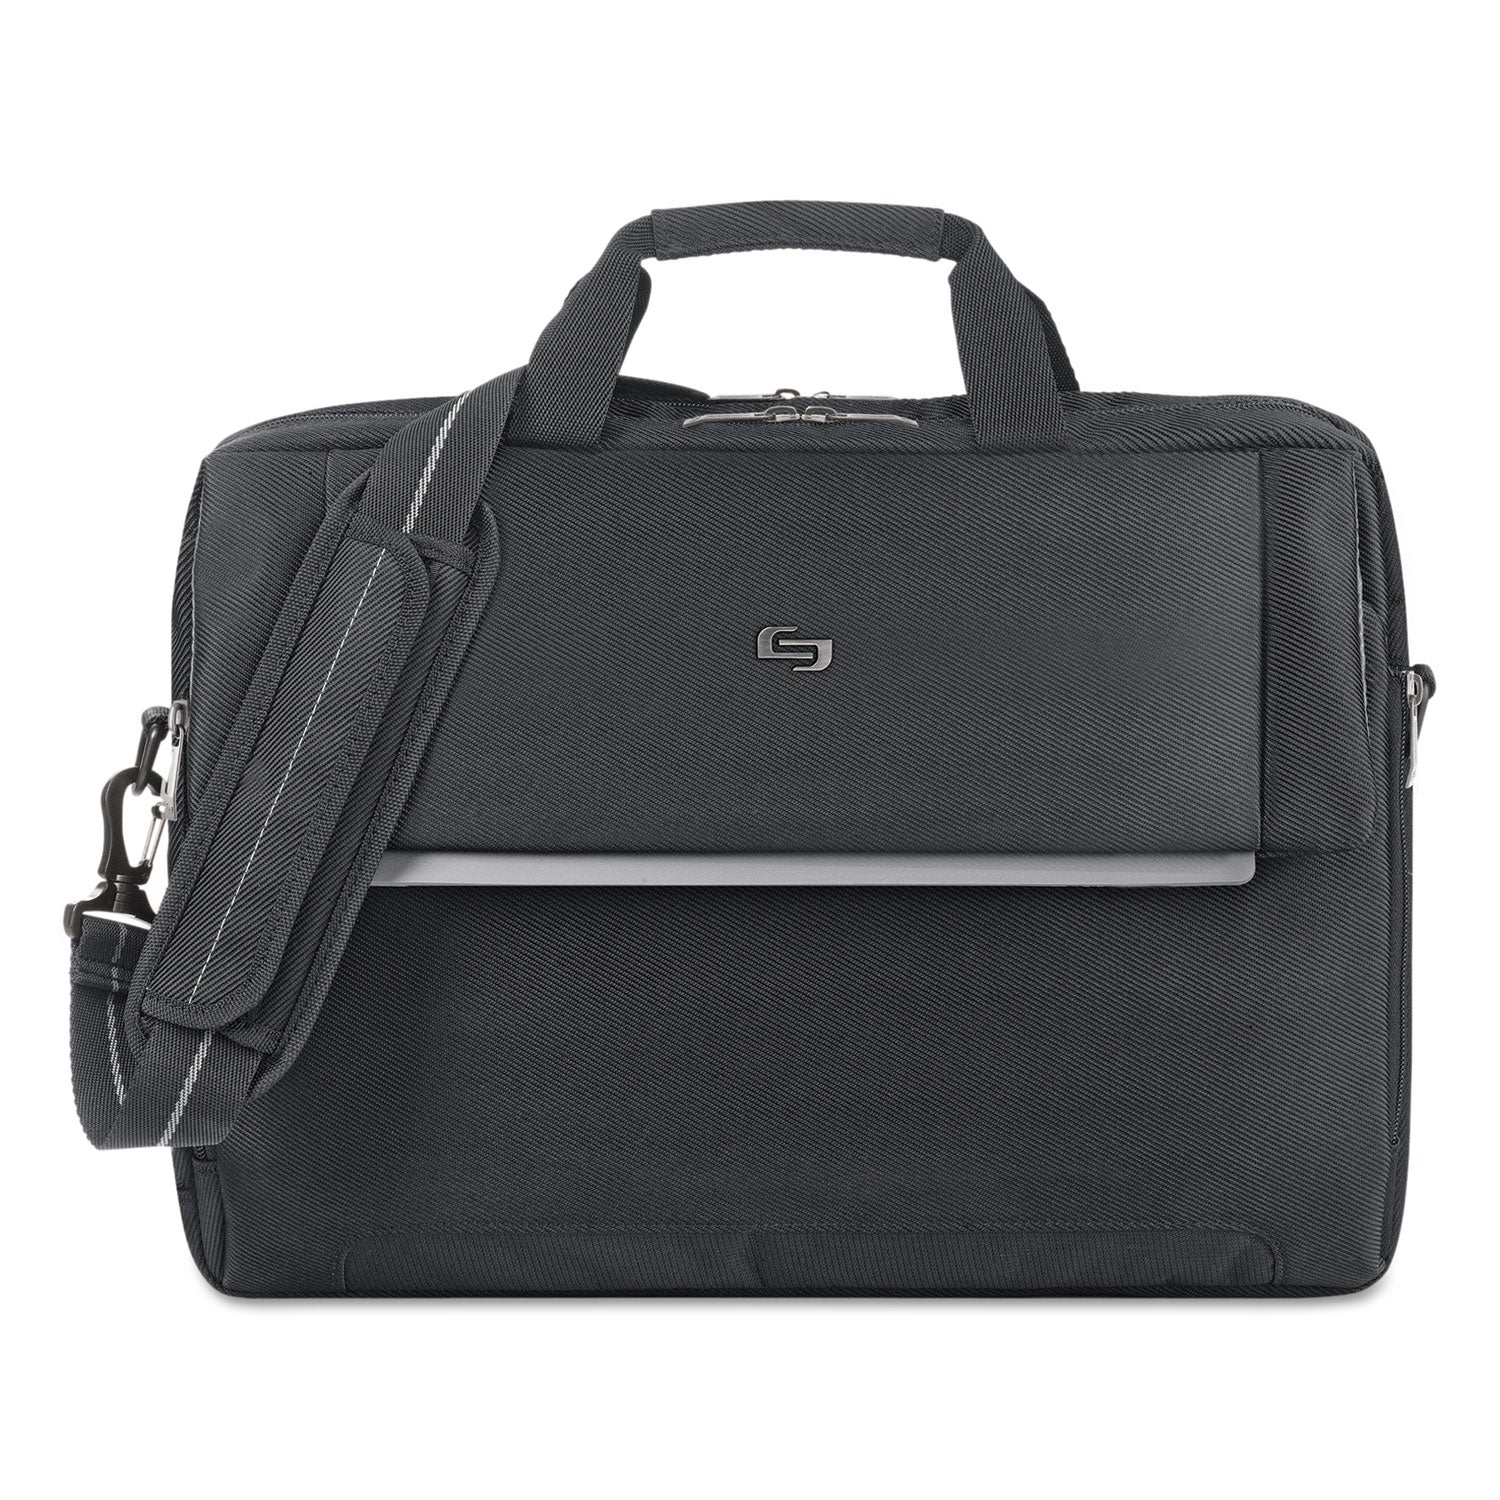 urban-briefcase-fits-devices-up-to-173-polyester-165-x-3-x-11-black_usllvl3304 - 1